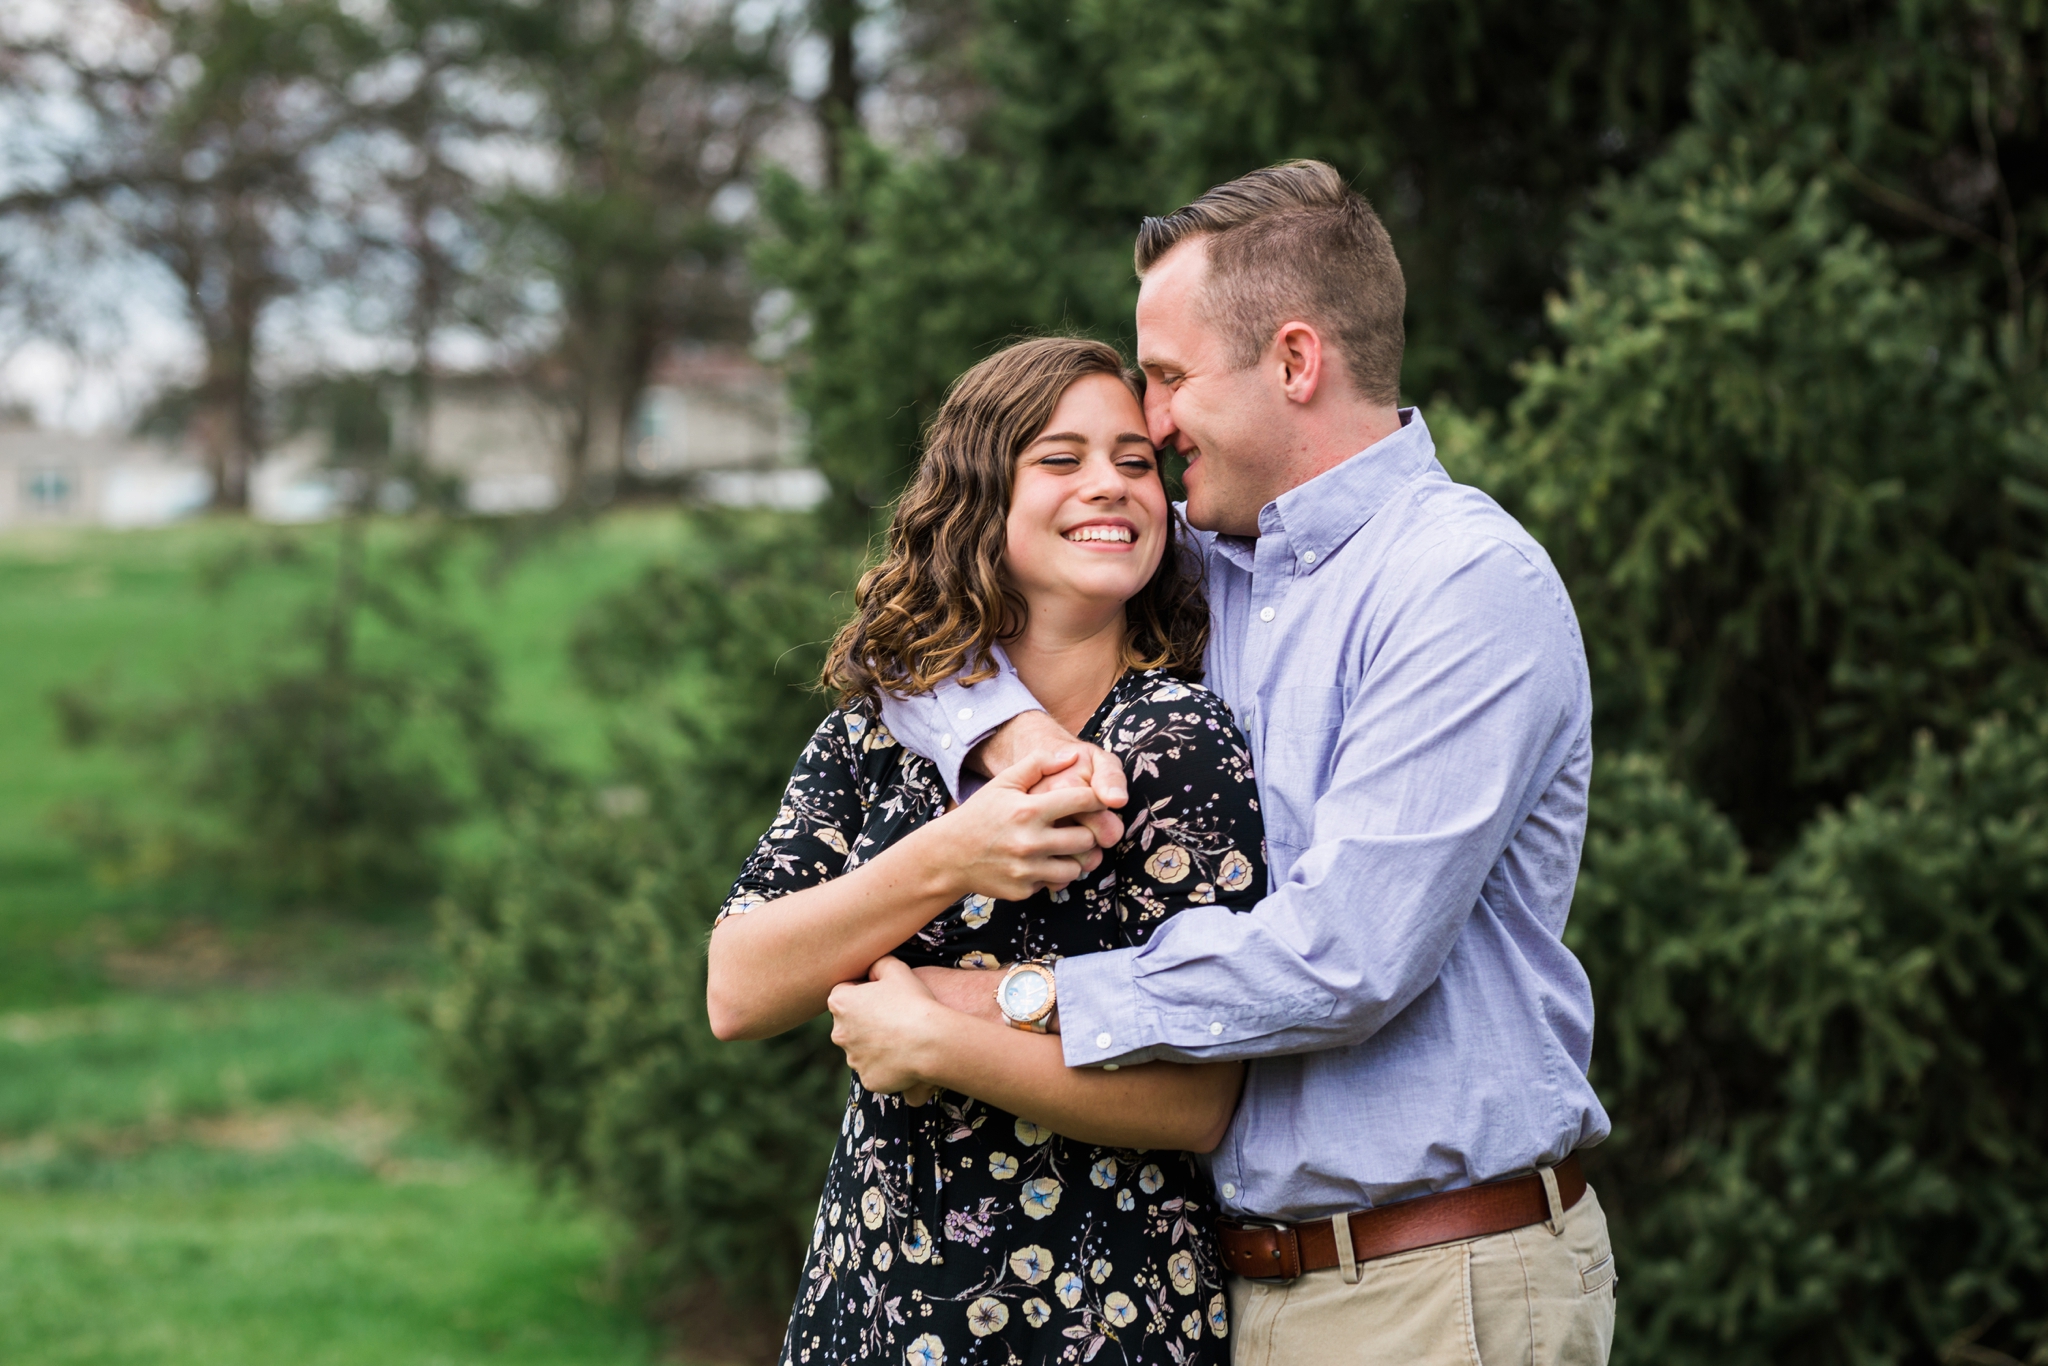 Emily Grace Photography, Lancaster PA Wedding Photographer, Photography for Joyful Couples, Greenfield Corporate Center Park Engagement Session